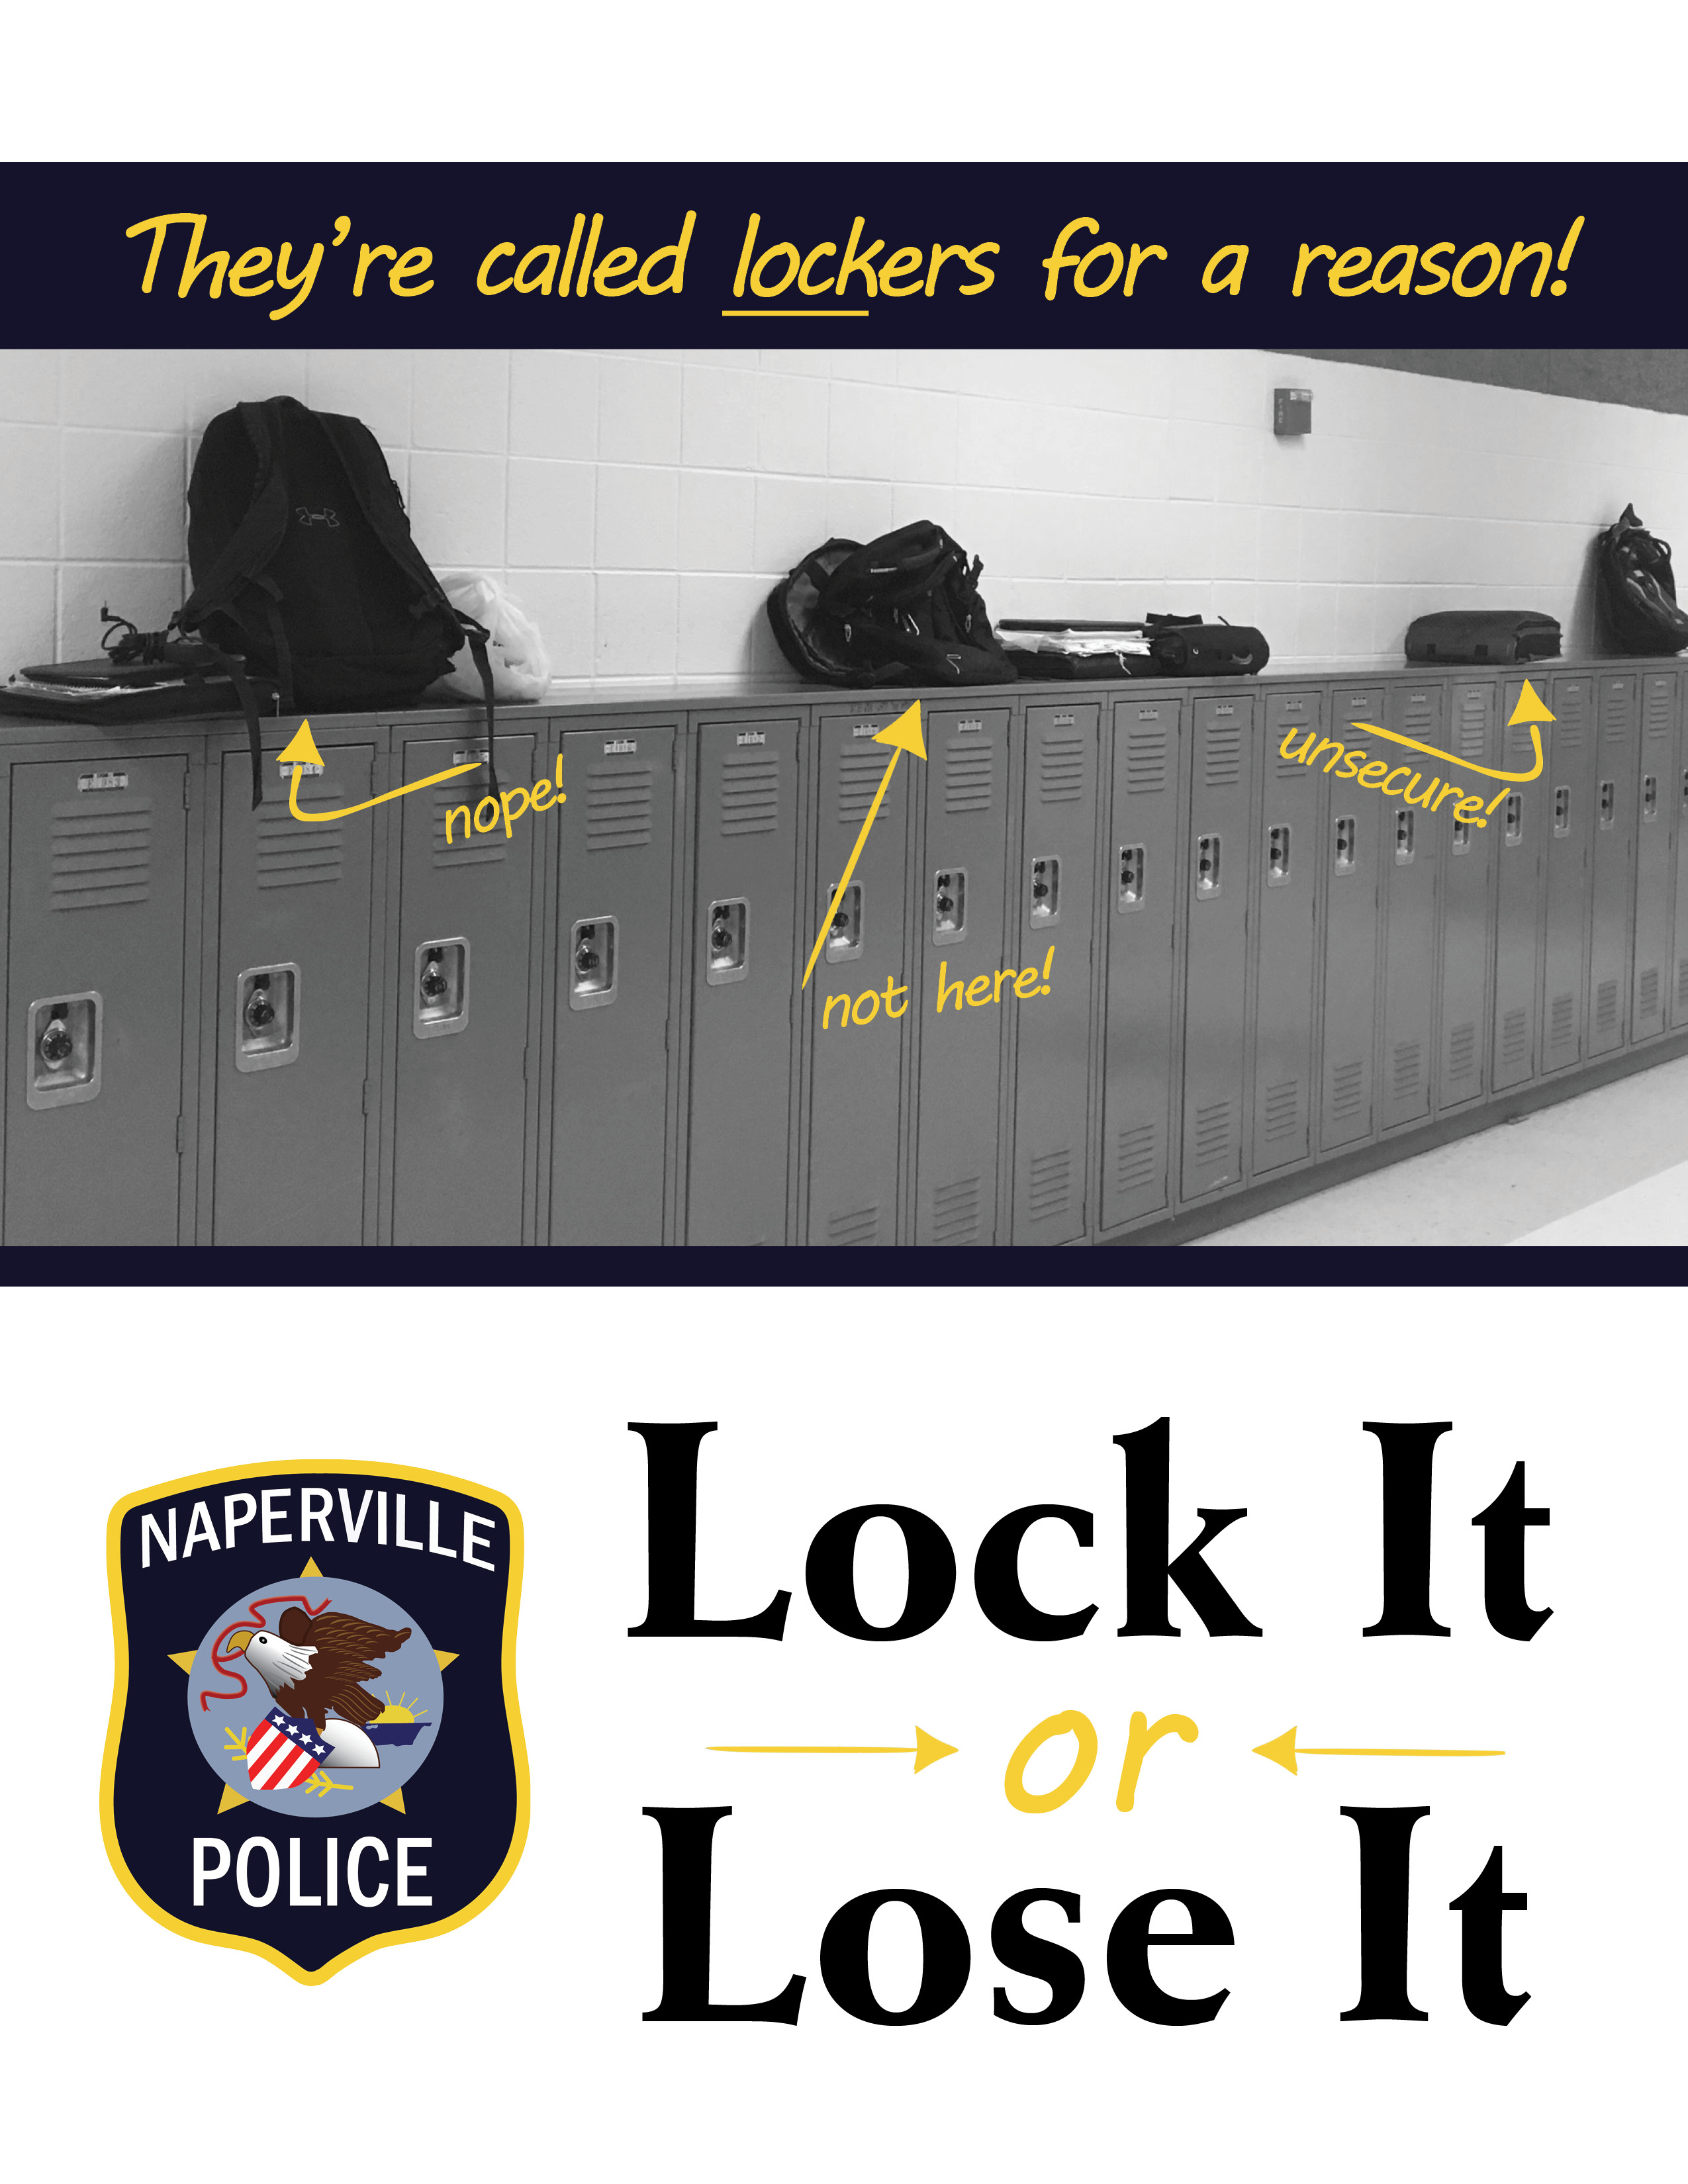 backpacks and other items sit in front of and on top of lockers and text: They're called LOCKers for a reason. Lock It or Lose It